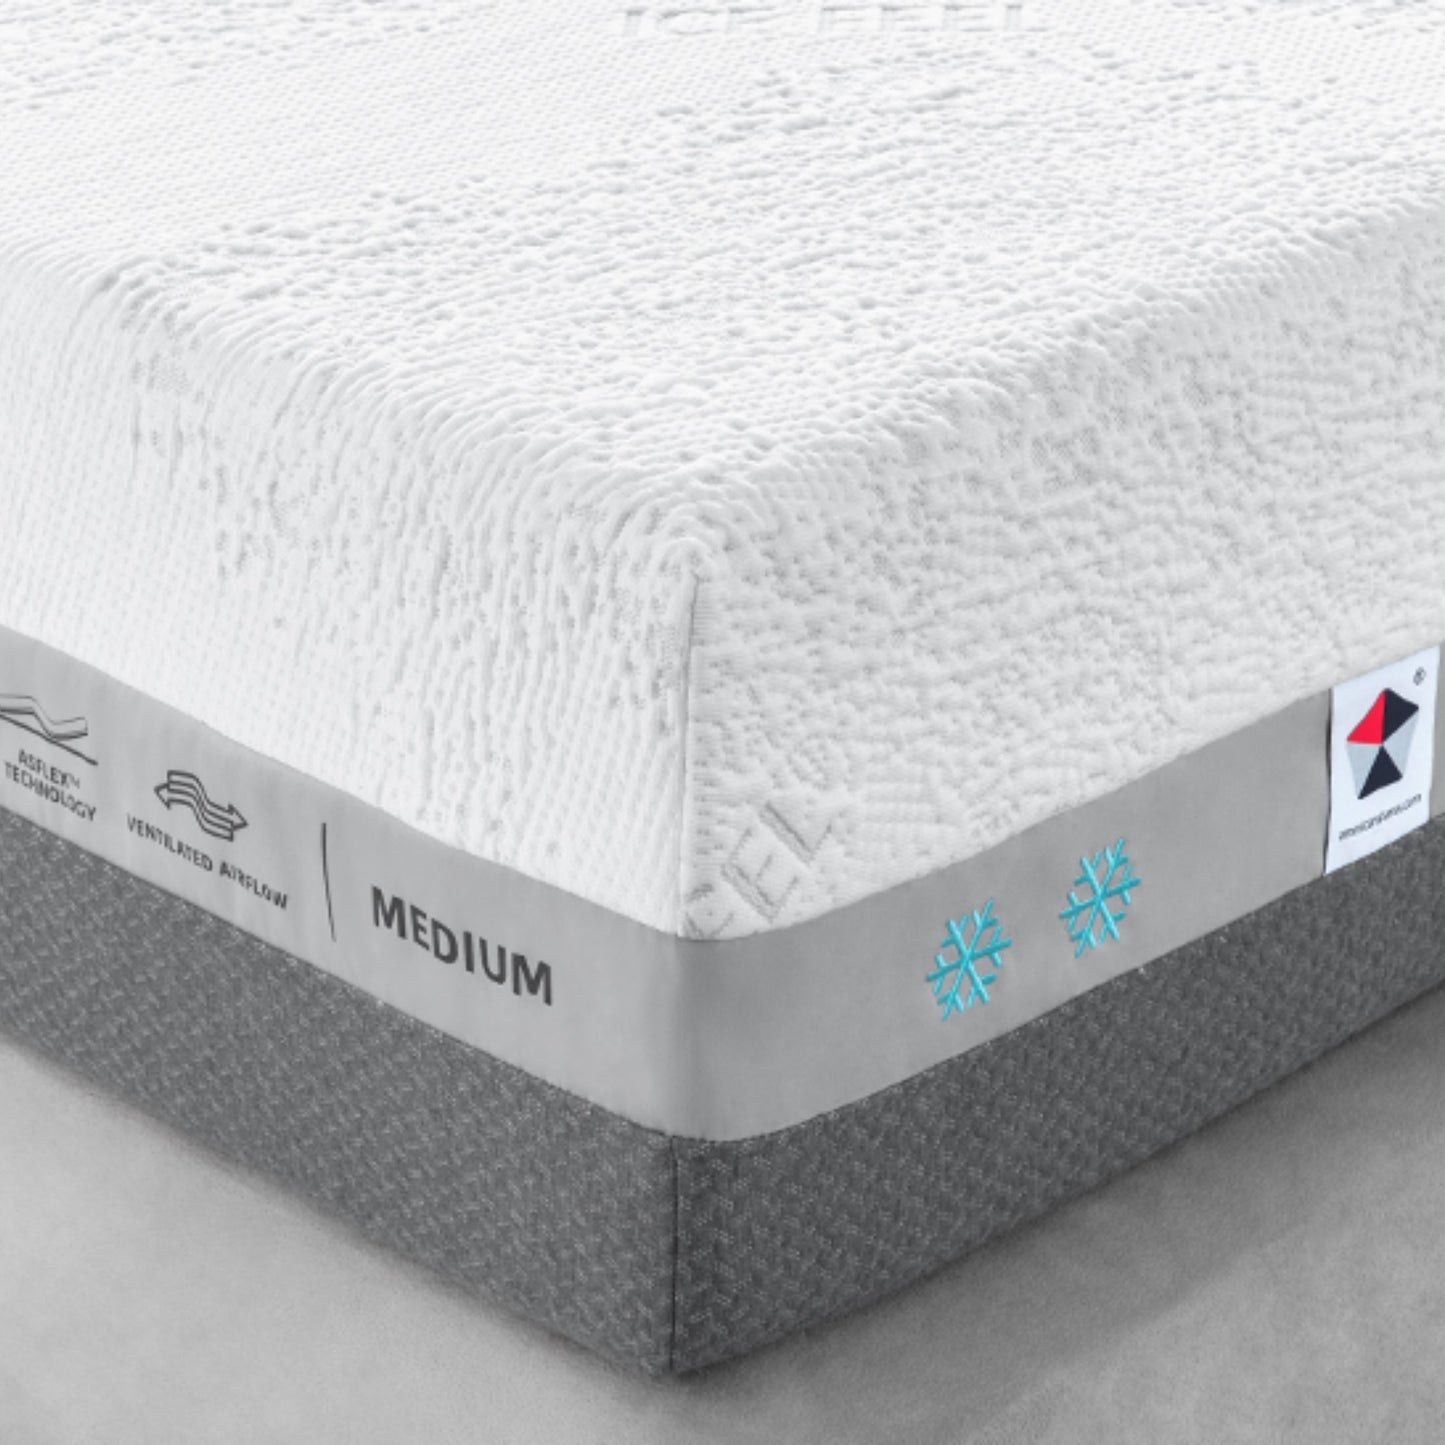 Primerest Ultra Twin XL Mattress, 12.5" Hybrid Max Gel Memory Foam with Ice Feel Cooling Knitted Fabric, Medium Plush Comfort and Individually Wrapped Pocketed Coils, Made in USA